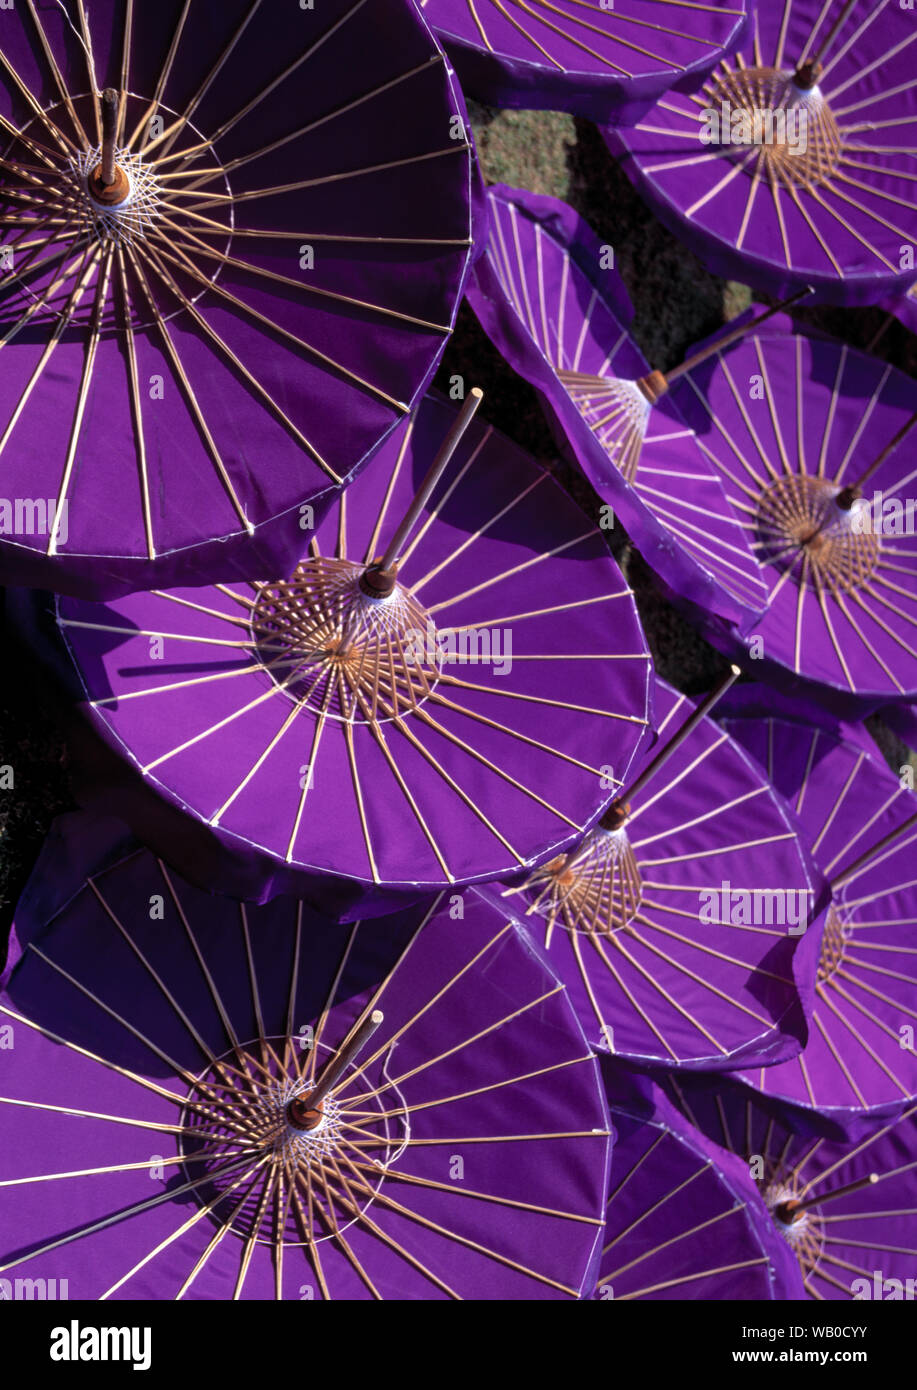 asia, asian, thailand, collection of colourful umbrellas displayed in the open air Stock Photo